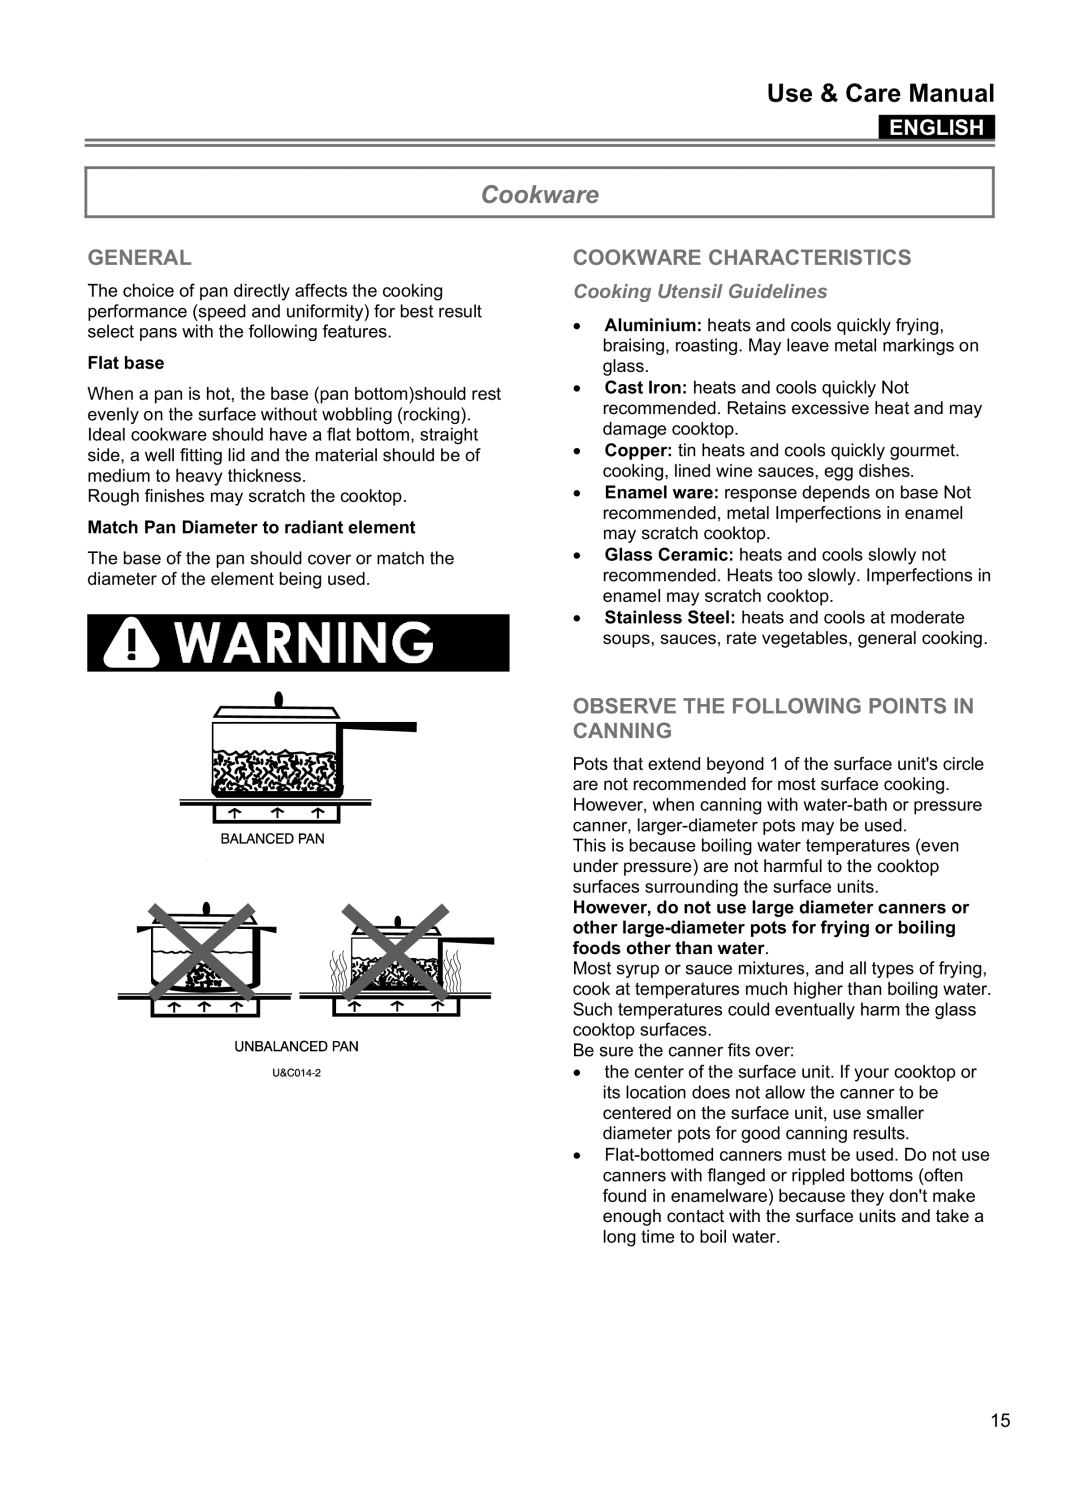 Blomberg CTE 30400 General, Cookware Characteristics, Observe The Following Points In Canning, Use & Care Manual 